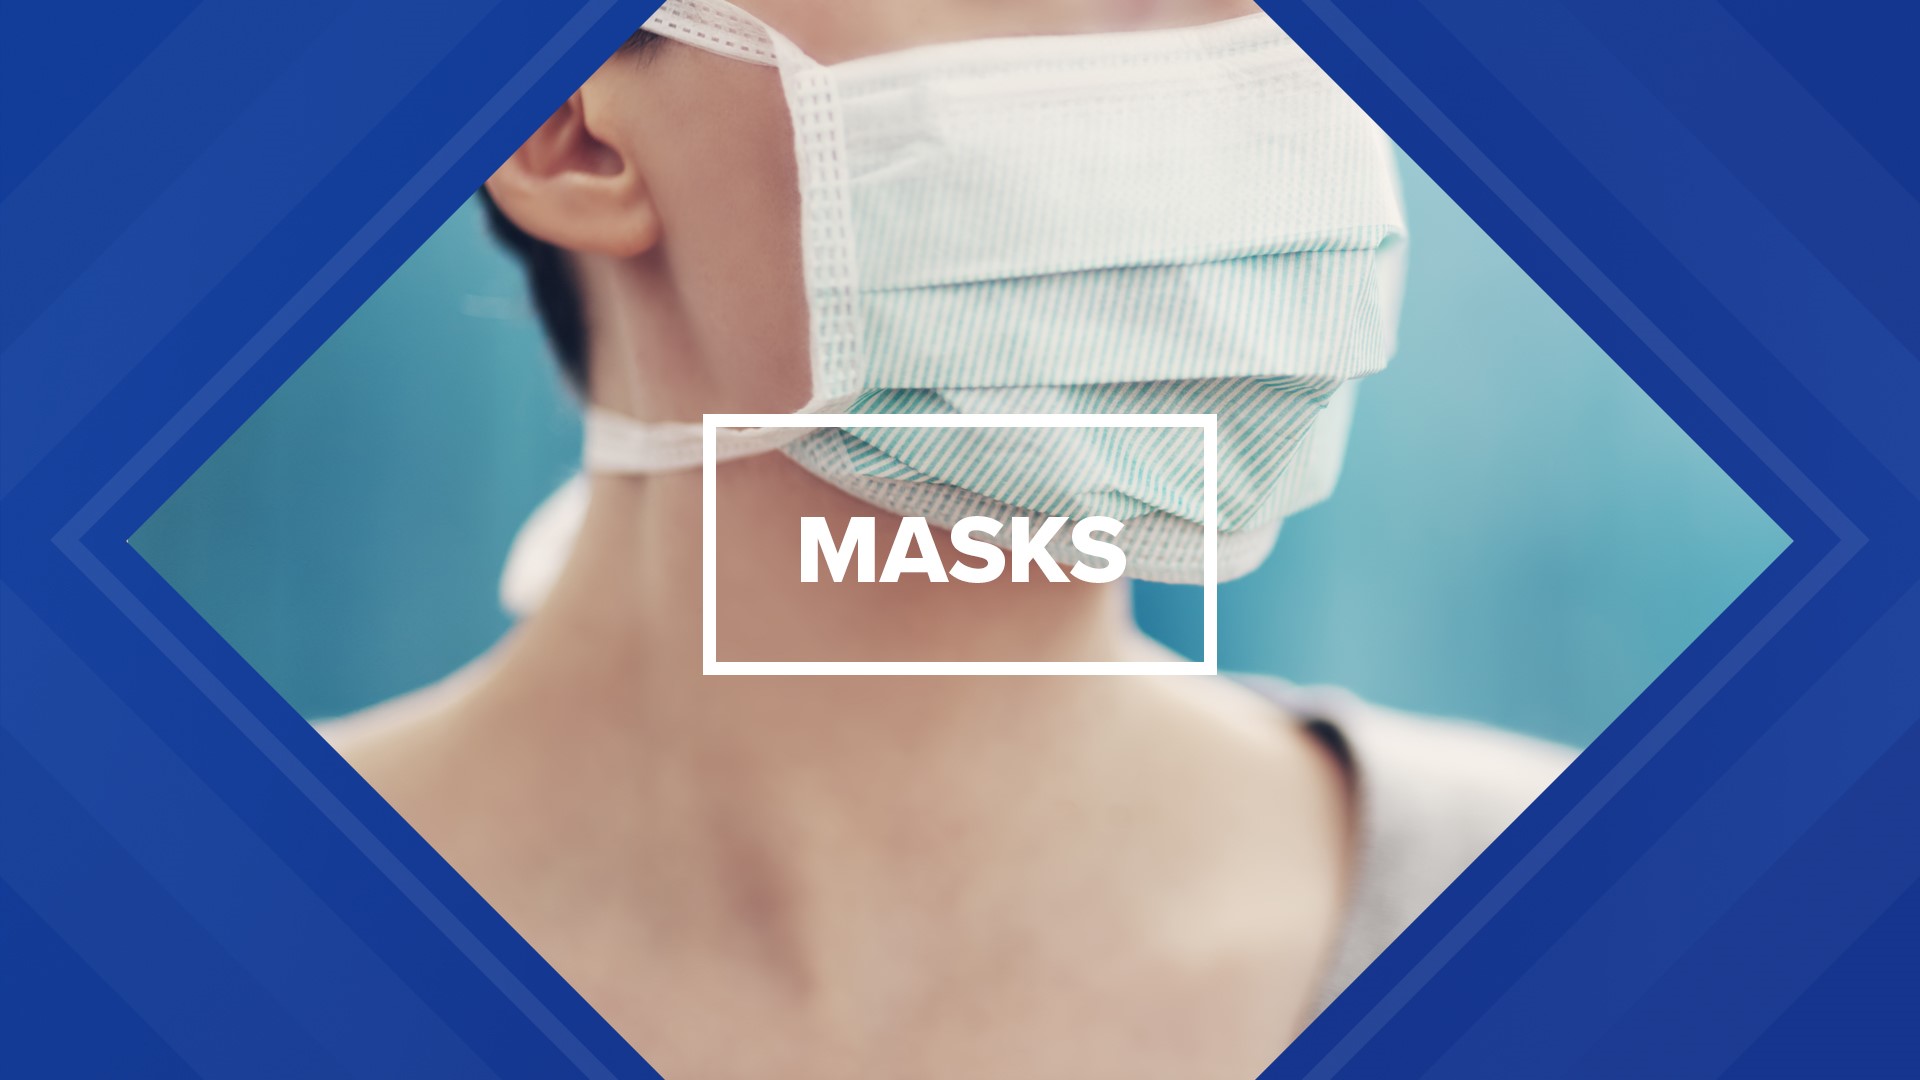 Many schools are removing mask mandates with the new county classification from the CDC.